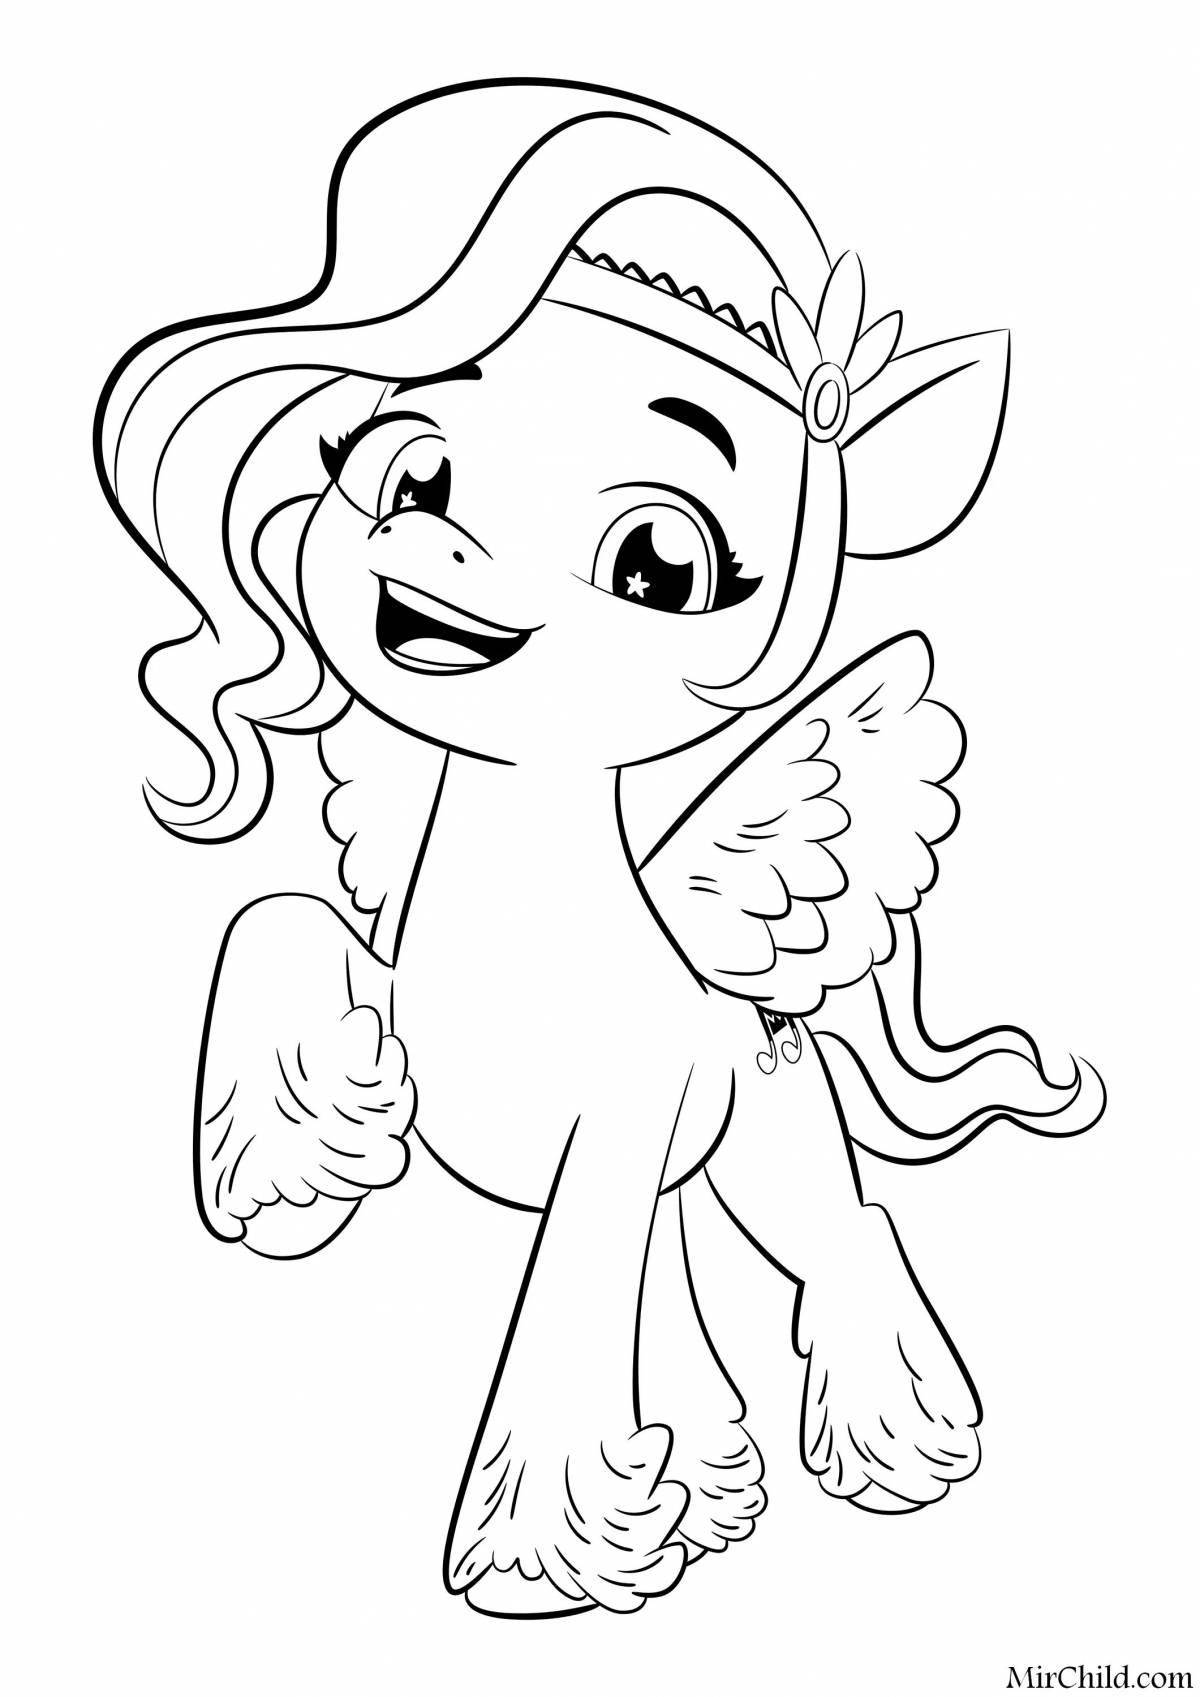 My little pony new generation dazzling coloring book